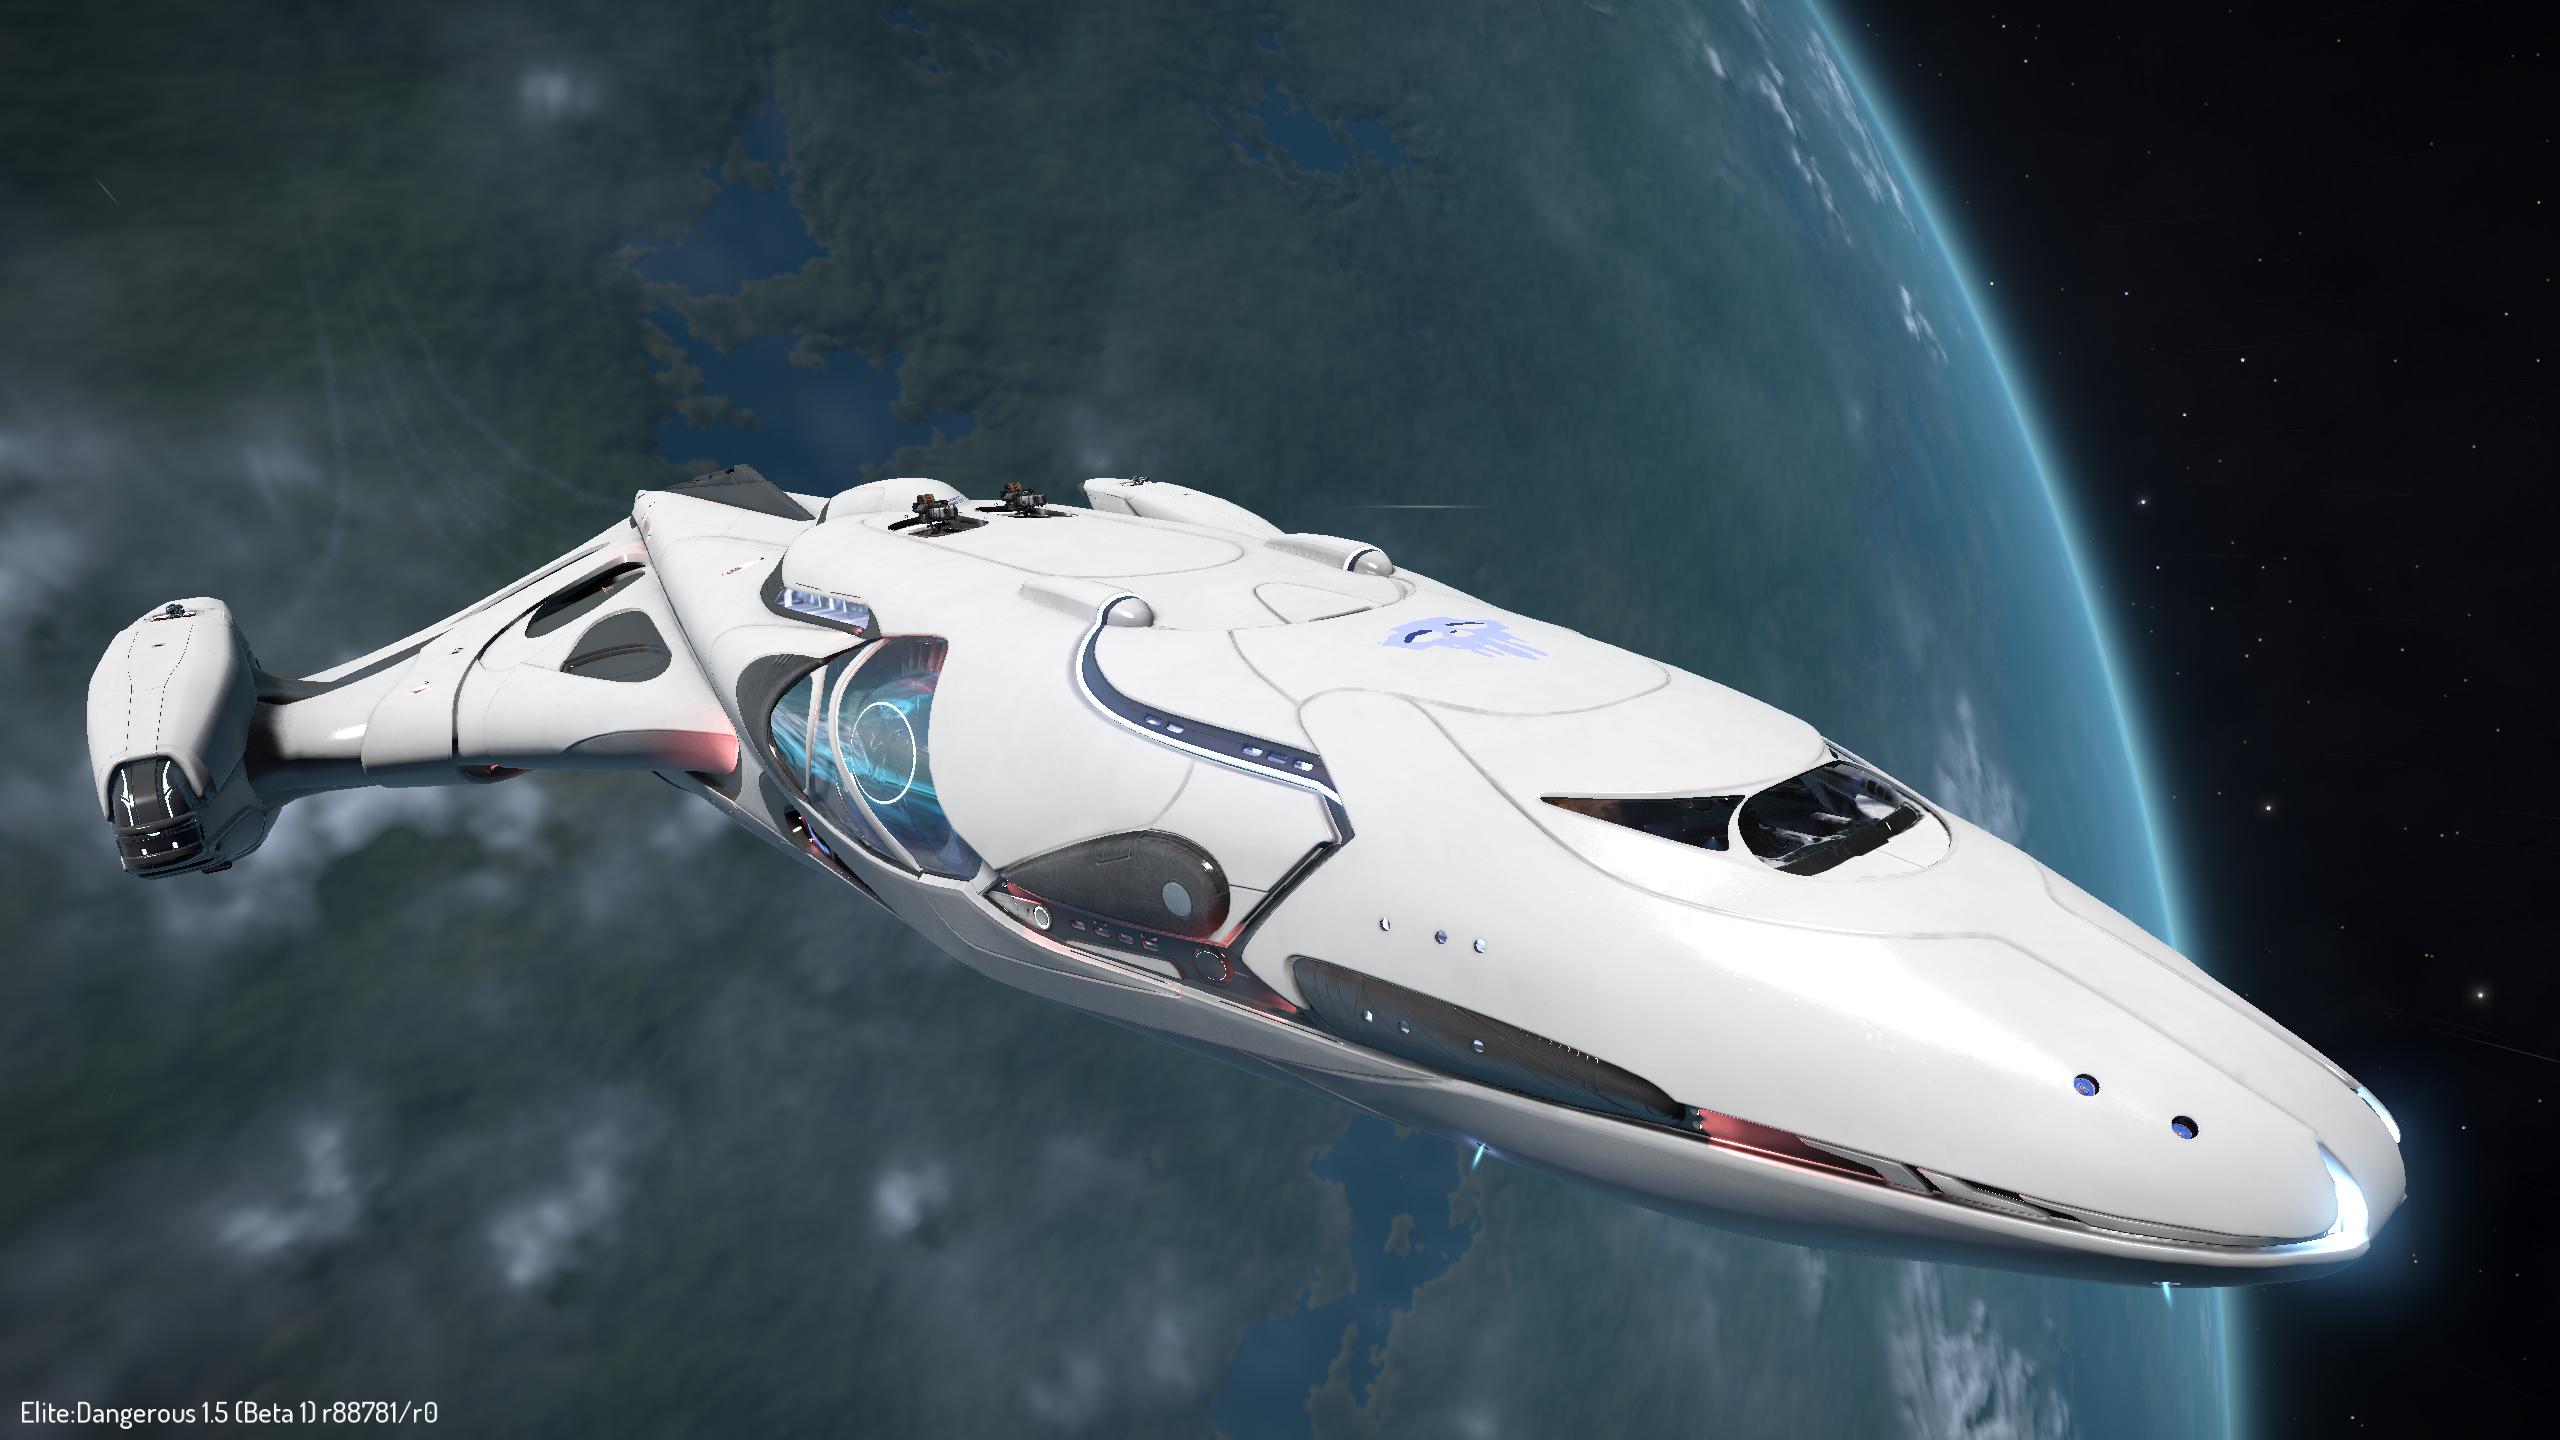 Compare Ships From Elite Dangerous Of Imperial Cutter Python. 